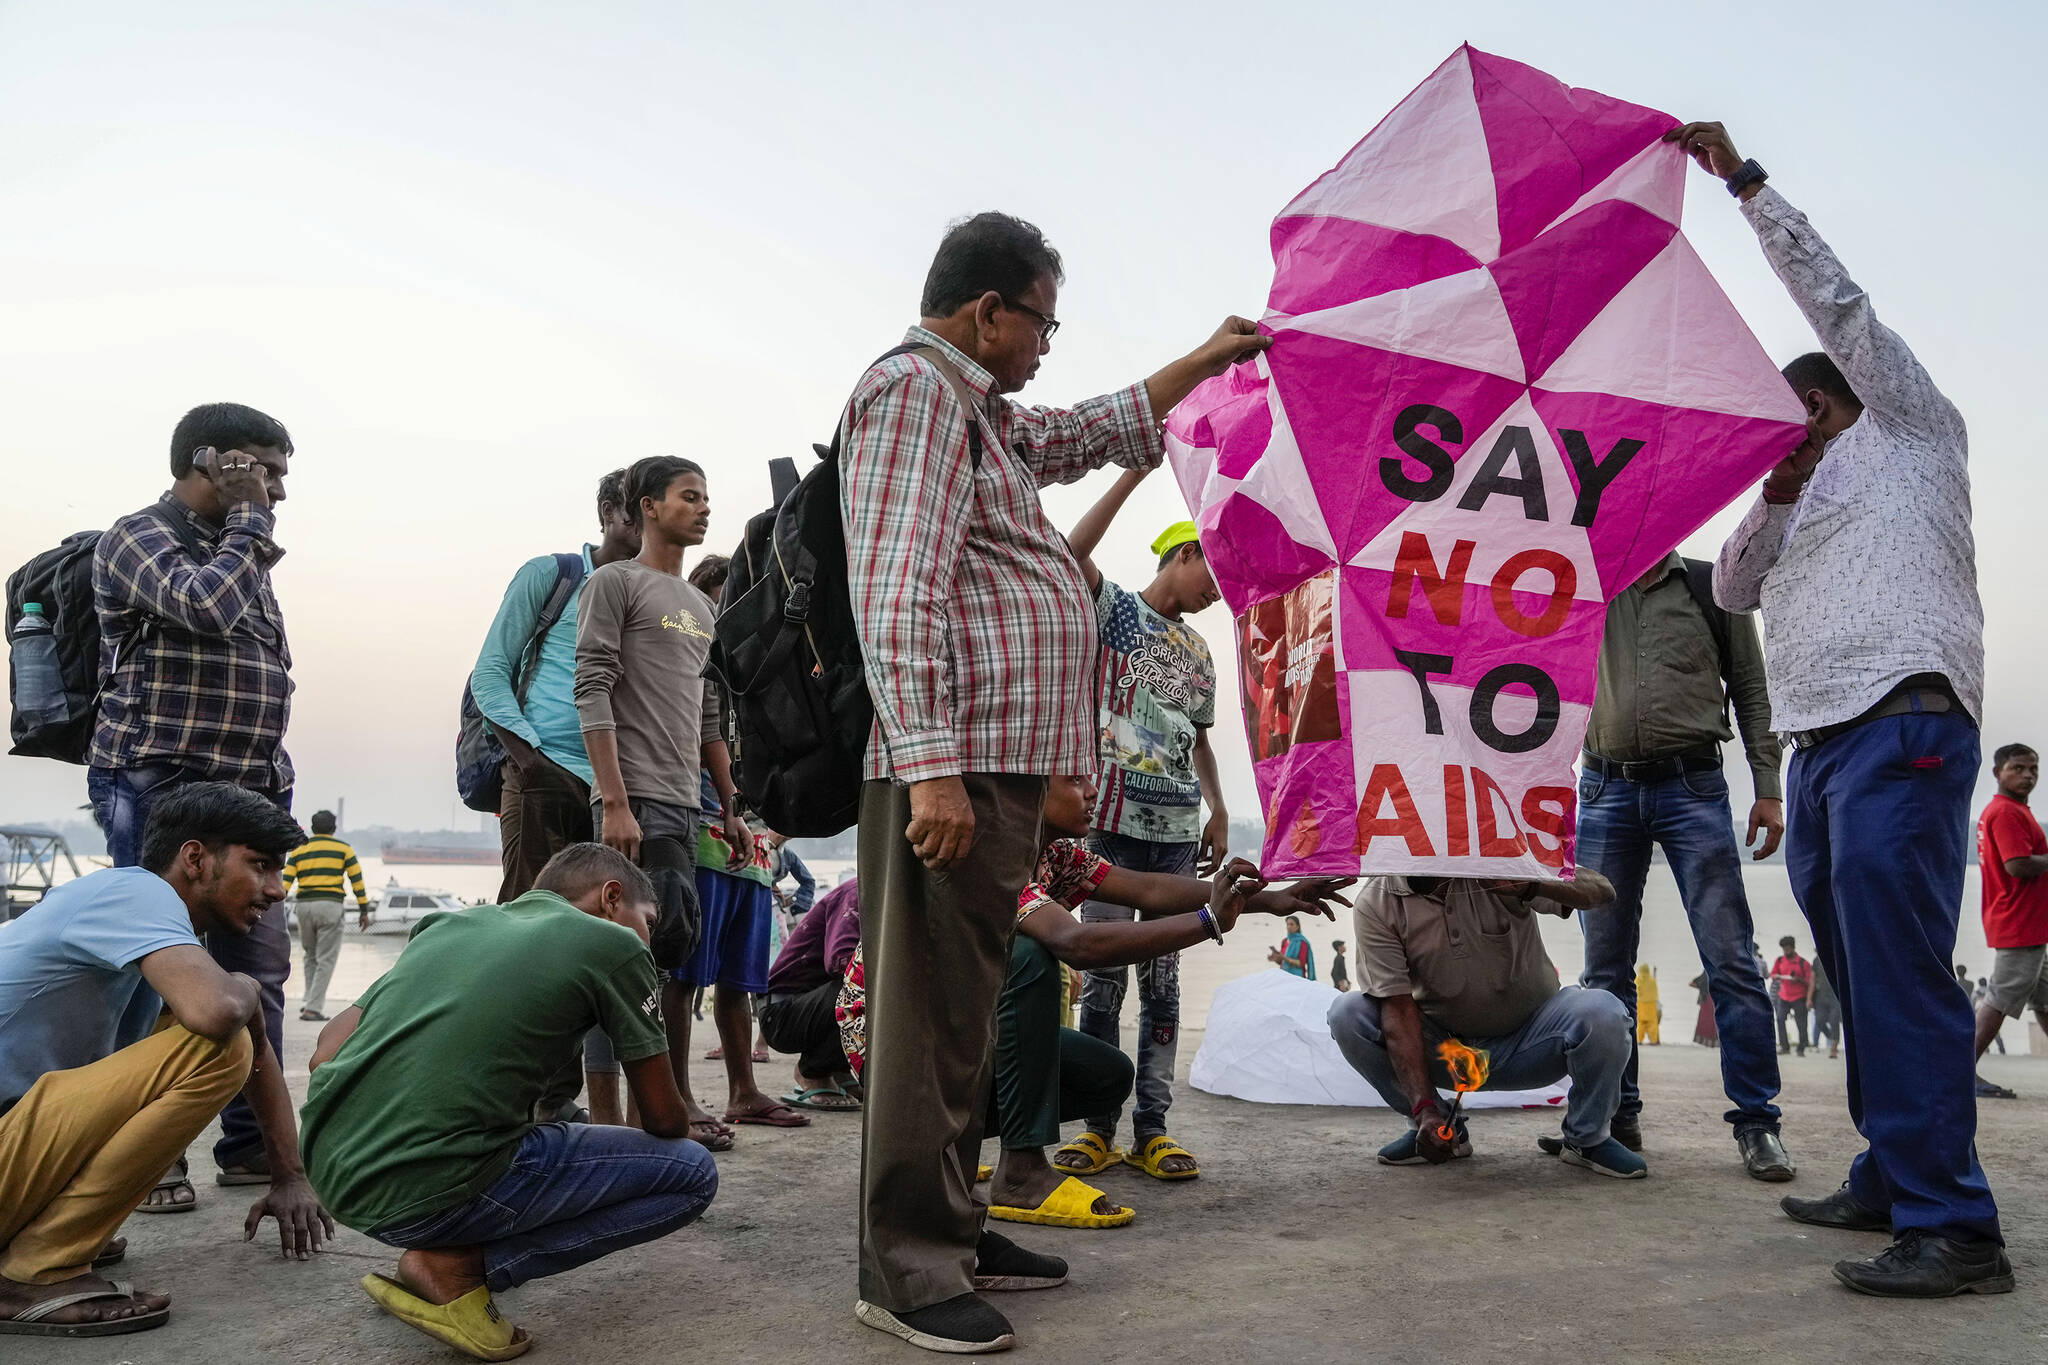 Activists prepare to release a sky lantern with a message on the banks of the Hooghly River ahead of World AIDS Day in Kolkata, India, Wednesday, Nov. 30, 2022. Every year, on 1 December, the world commemorates World AIDS Day. People around the world unite to show support for people living with and affected by HIV and to remember those who lost their lives to AIDS. (AP Photo/Bikas Das)